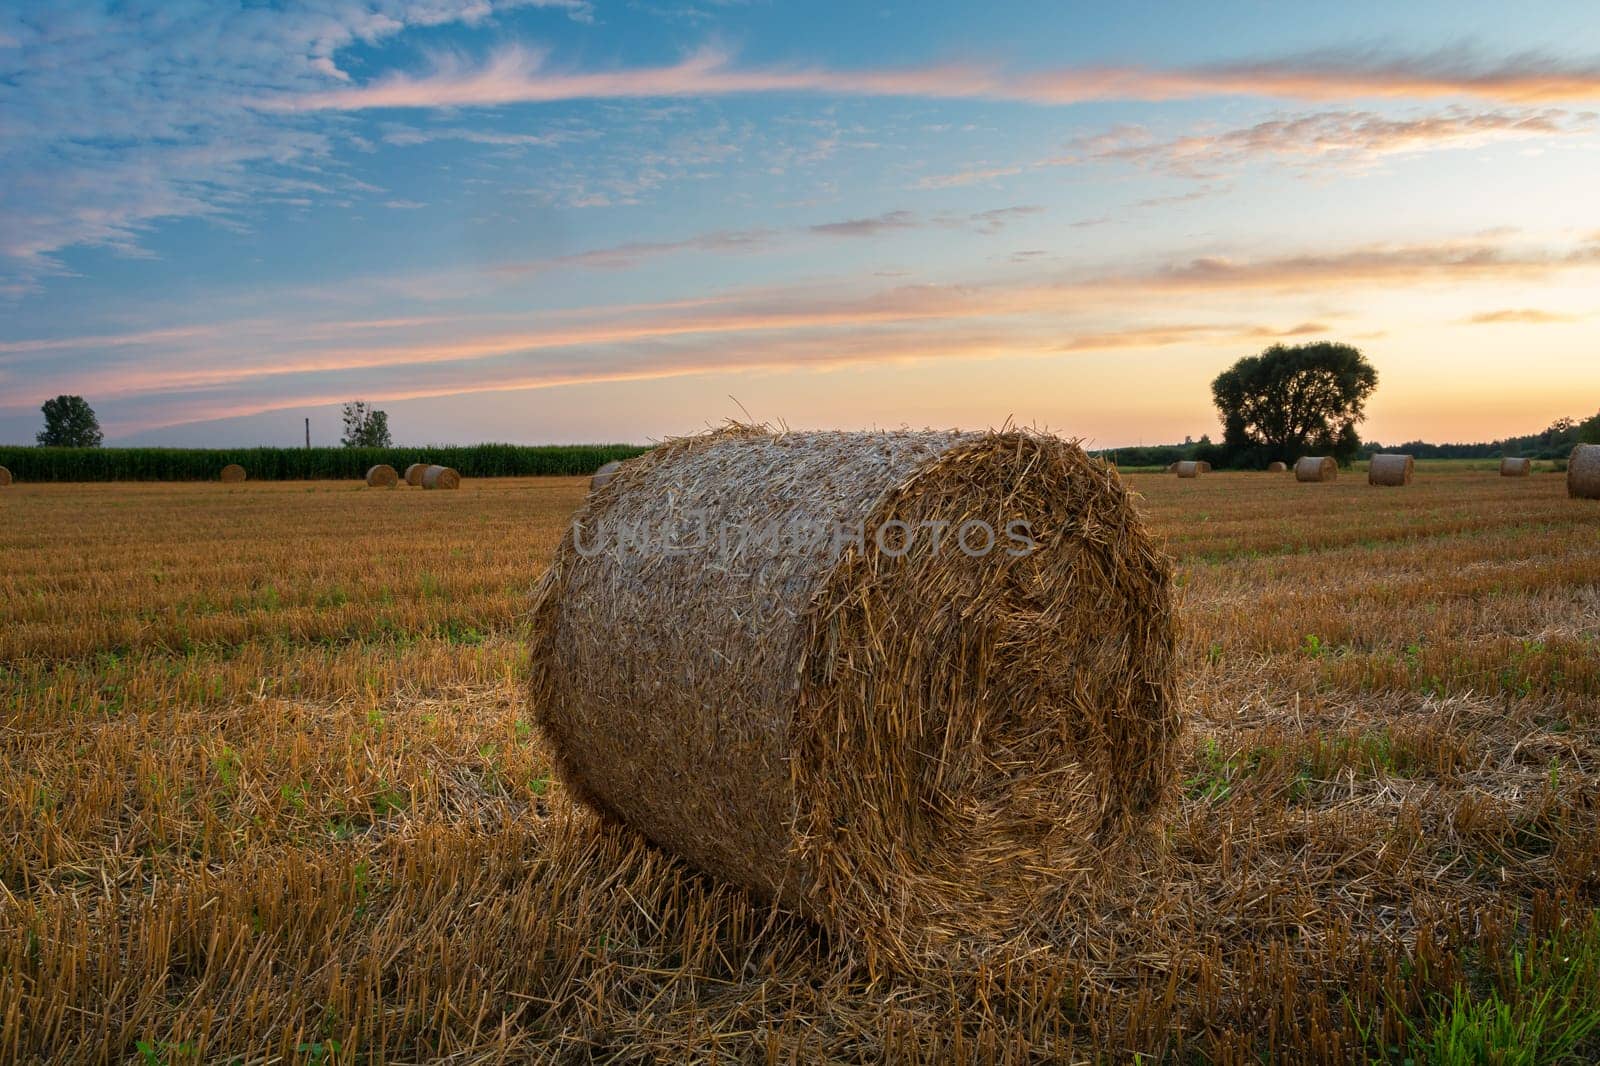 Round bale of hay in the field and the sky after sunset by darekb22